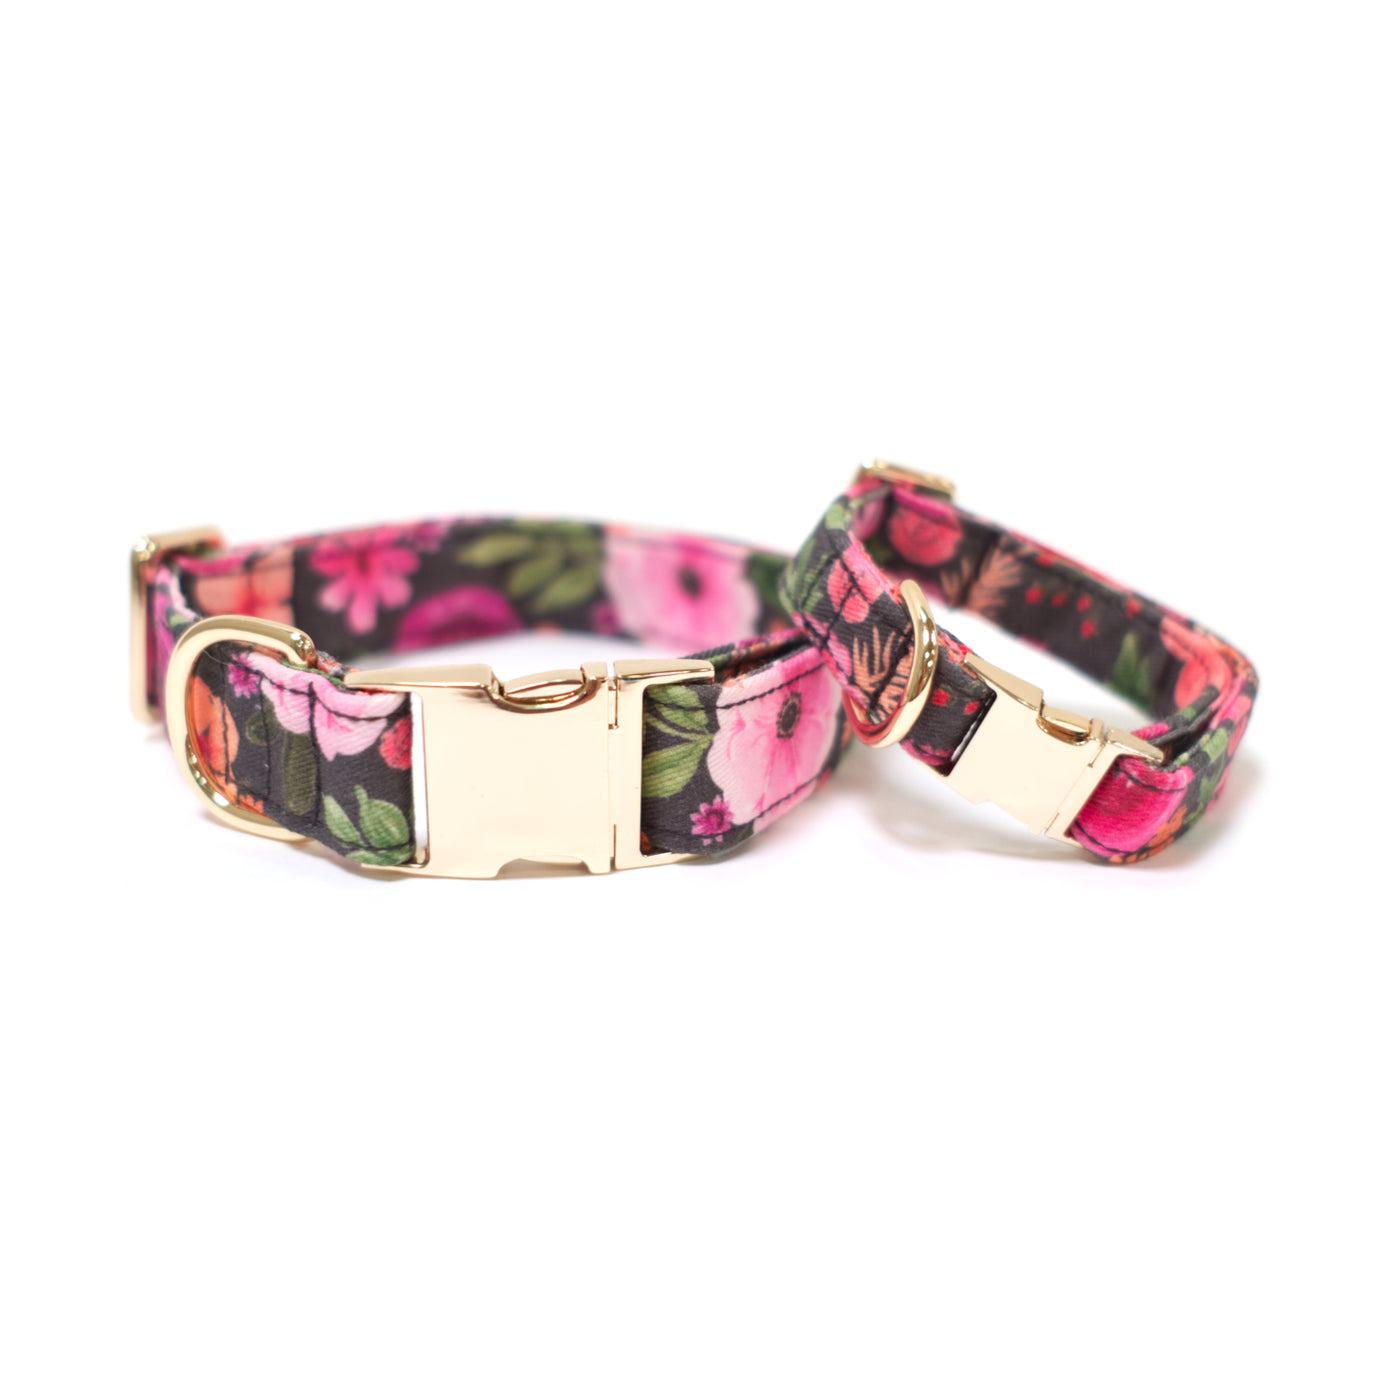 Floral dog collar with gold hardware in size small and medium